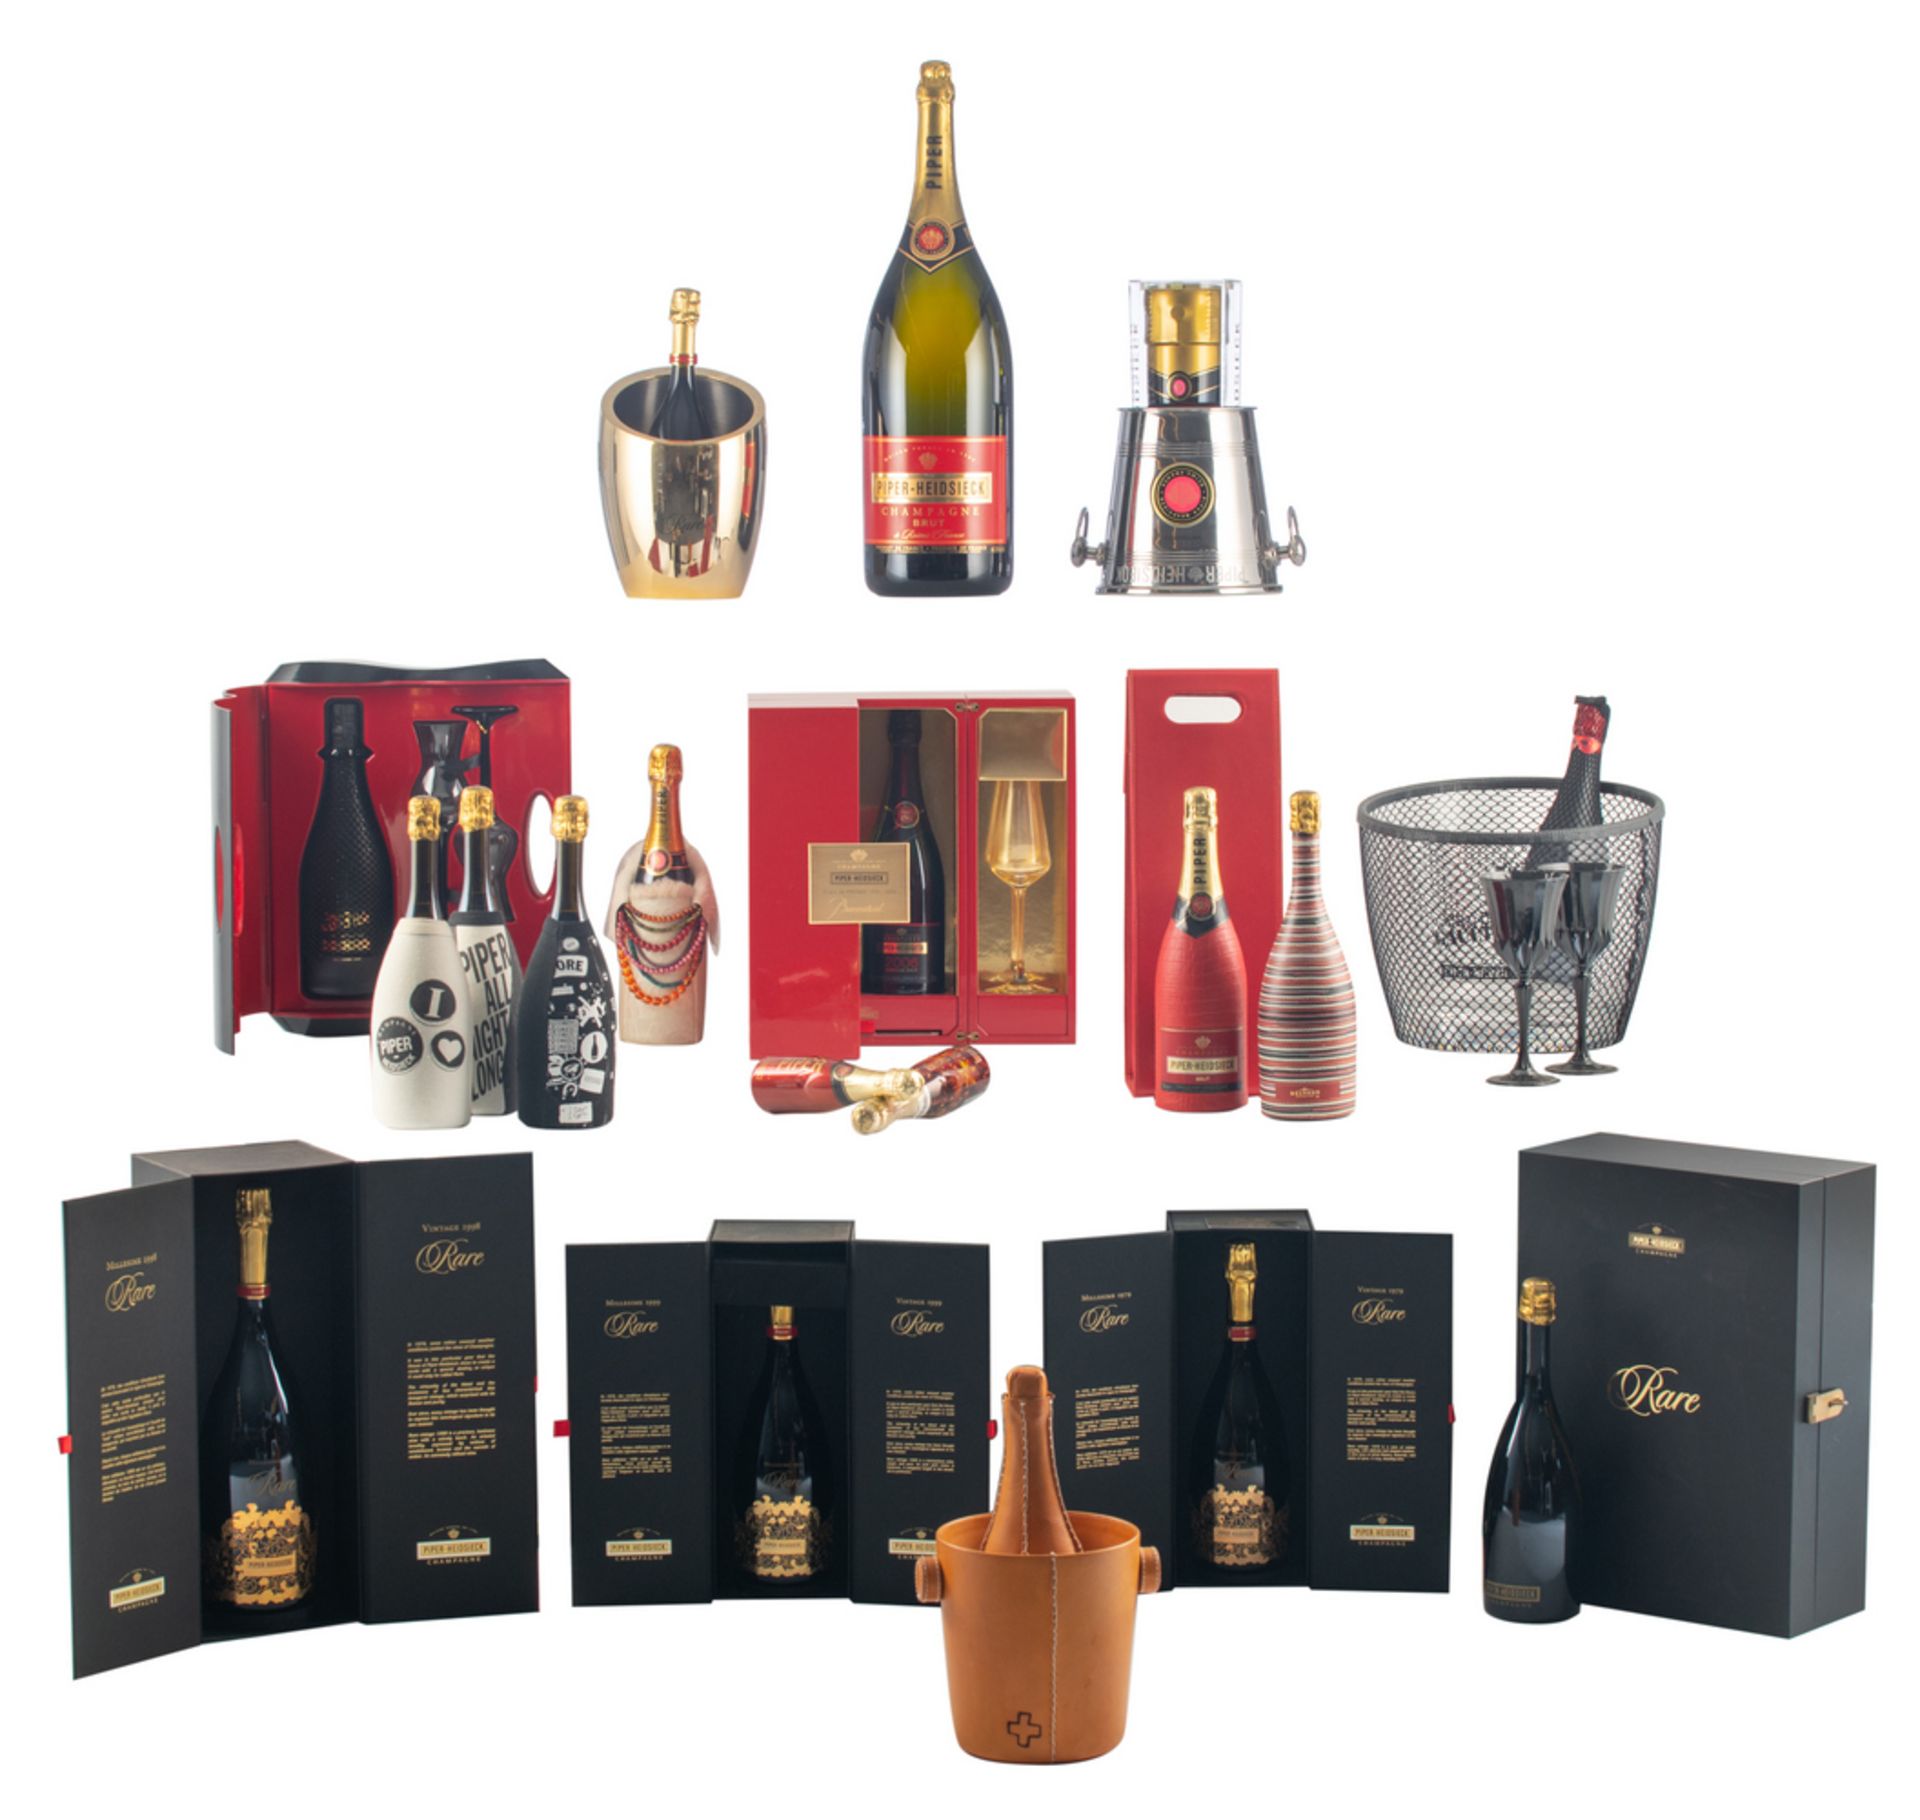 An important lot of collector's items of Piper-Heidsick champagne among which boxes 'rare'